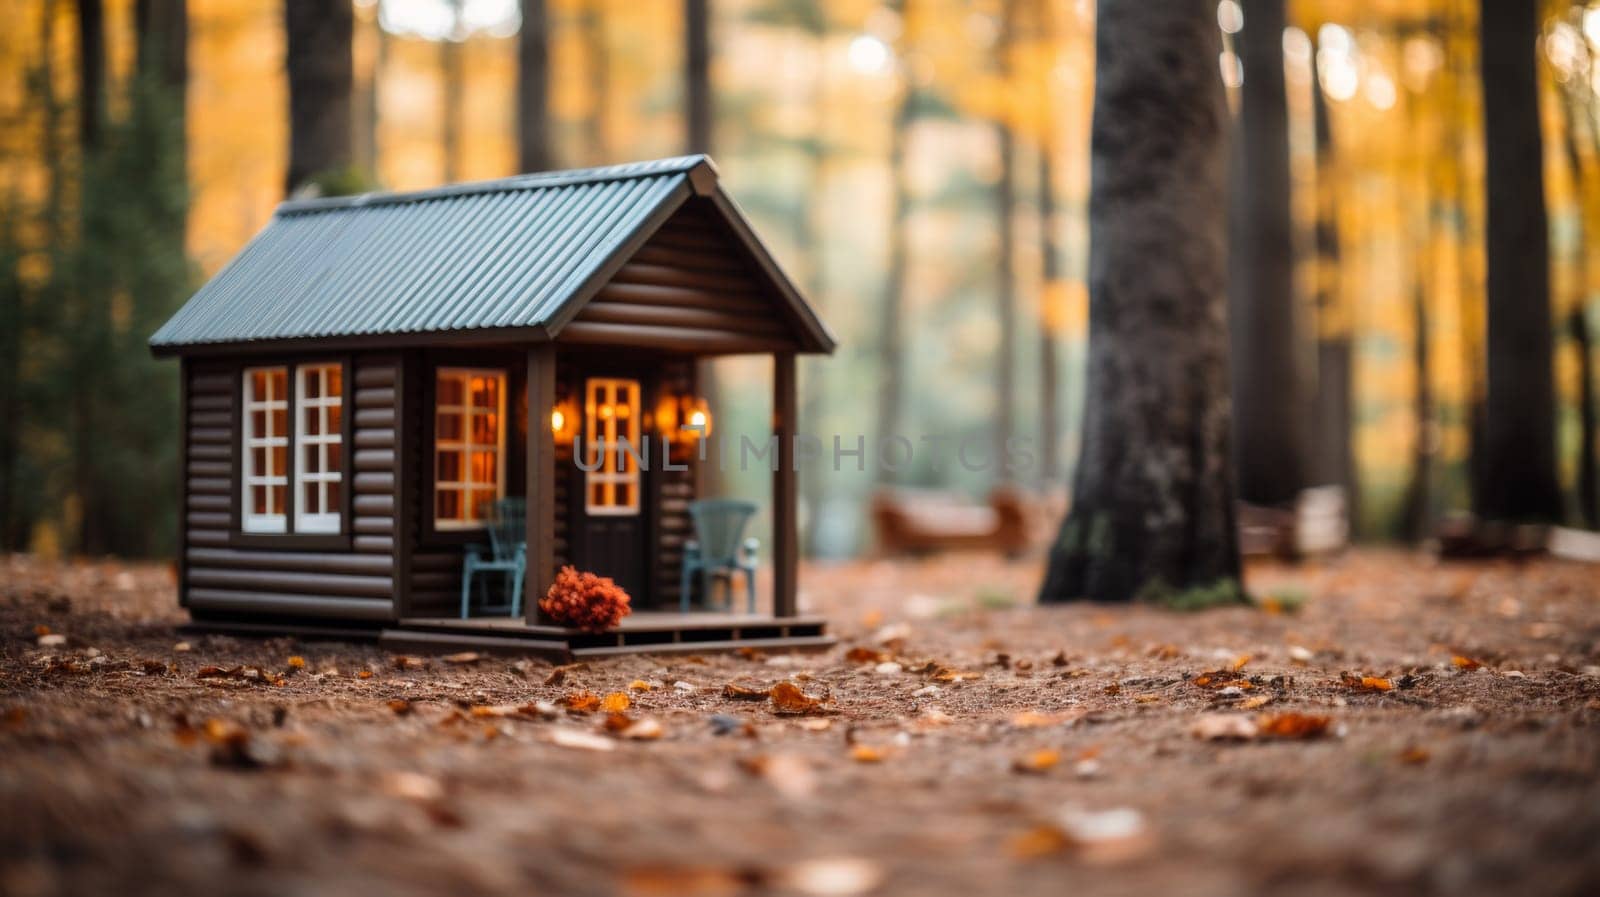 A miniature house sitting in the middle of a forest